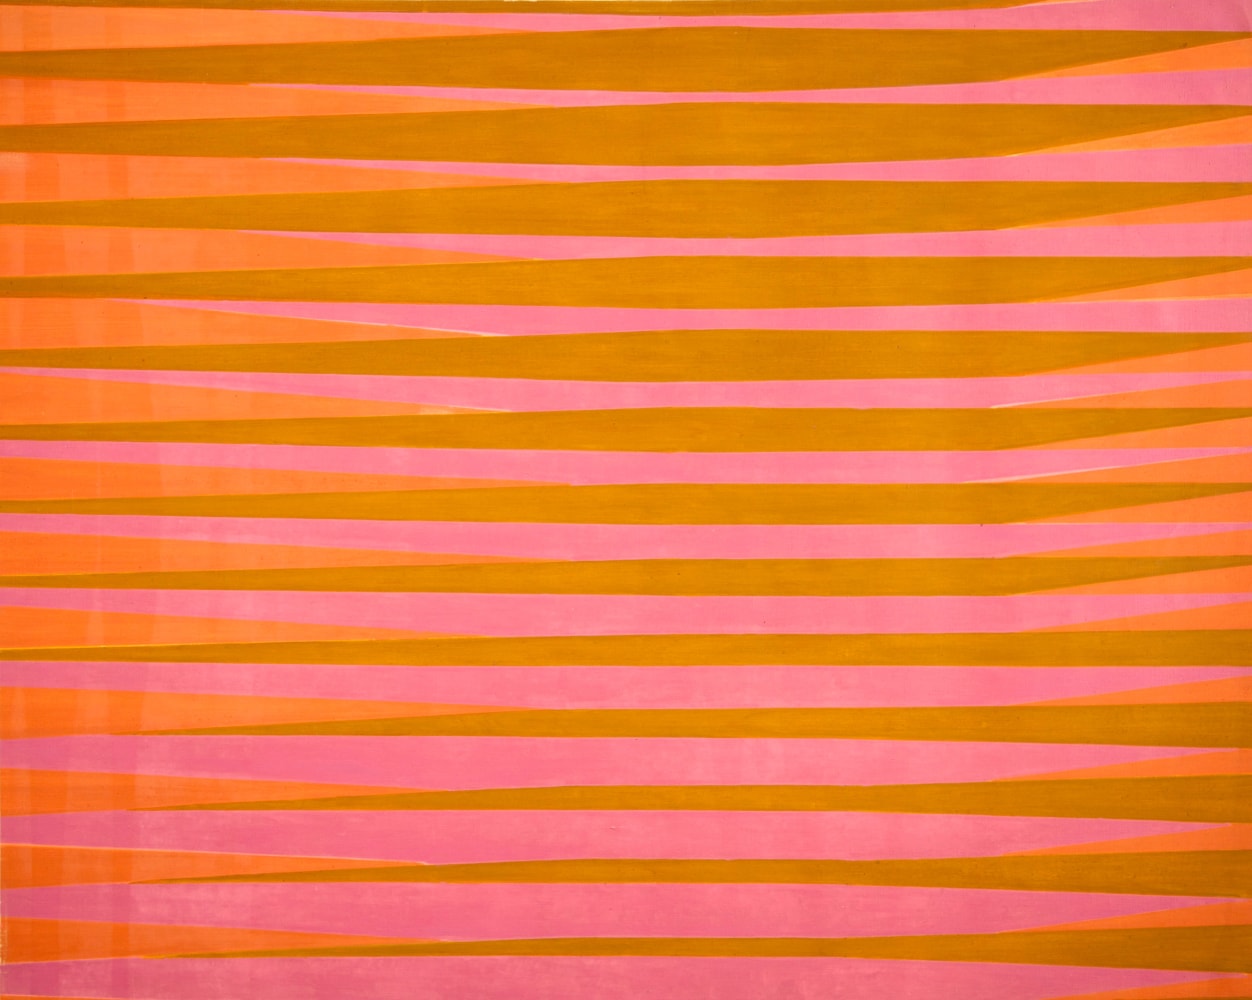 Michael Kidner (1917-2009) Stripes Study for Bill, 1962 oil on canvas 47 3/4 x 59 1/2 inches; 121.3 x 151.1 centimeters LSFA# 14069